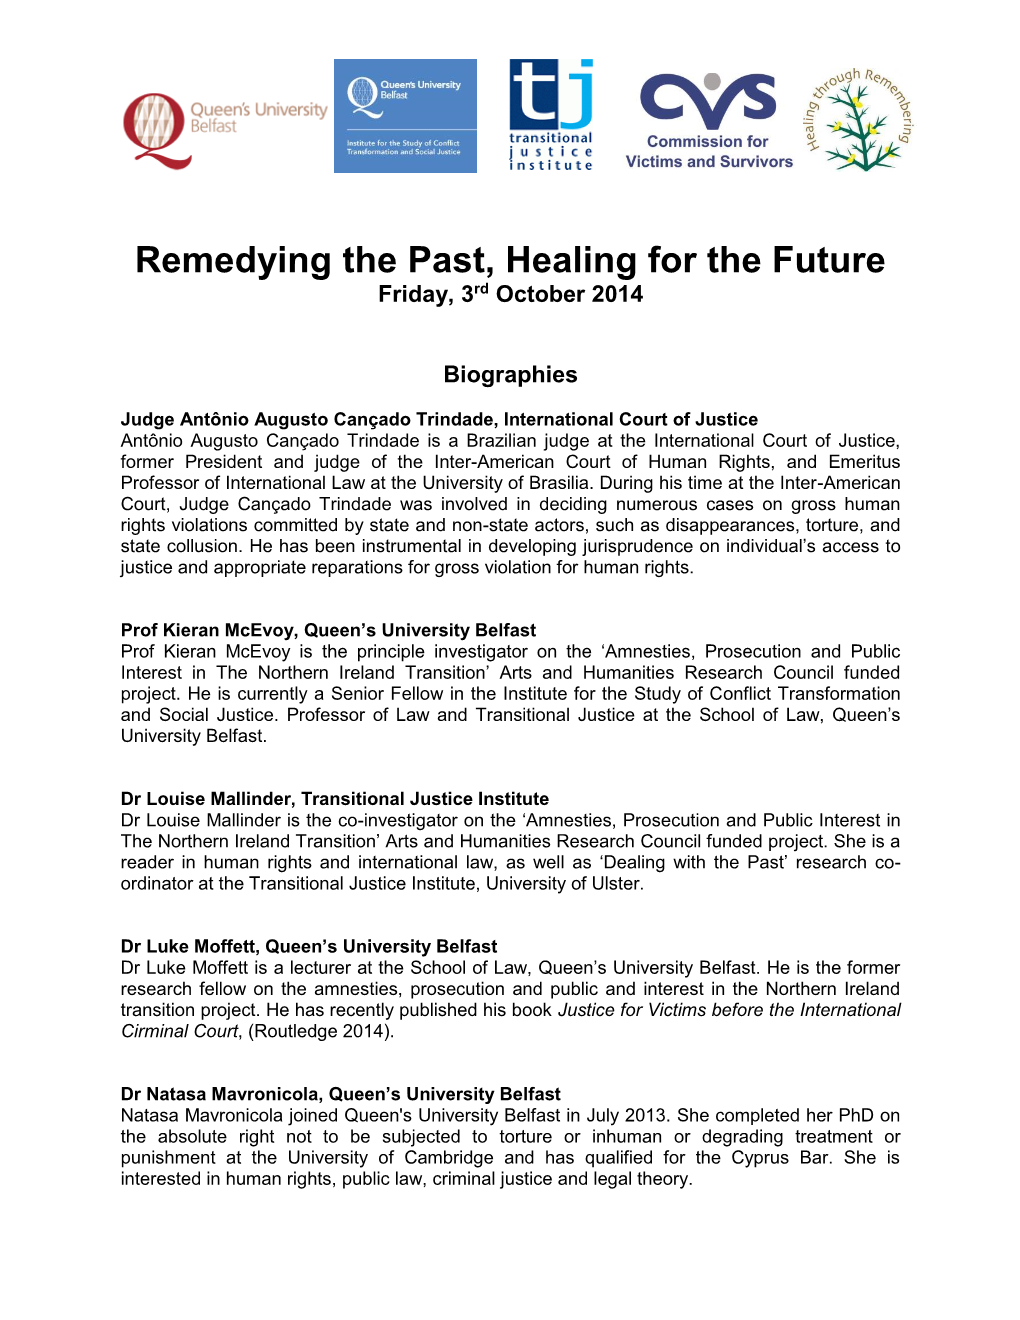 Remedying the Past, Healing for the Future Friday, 3Rd October 2014